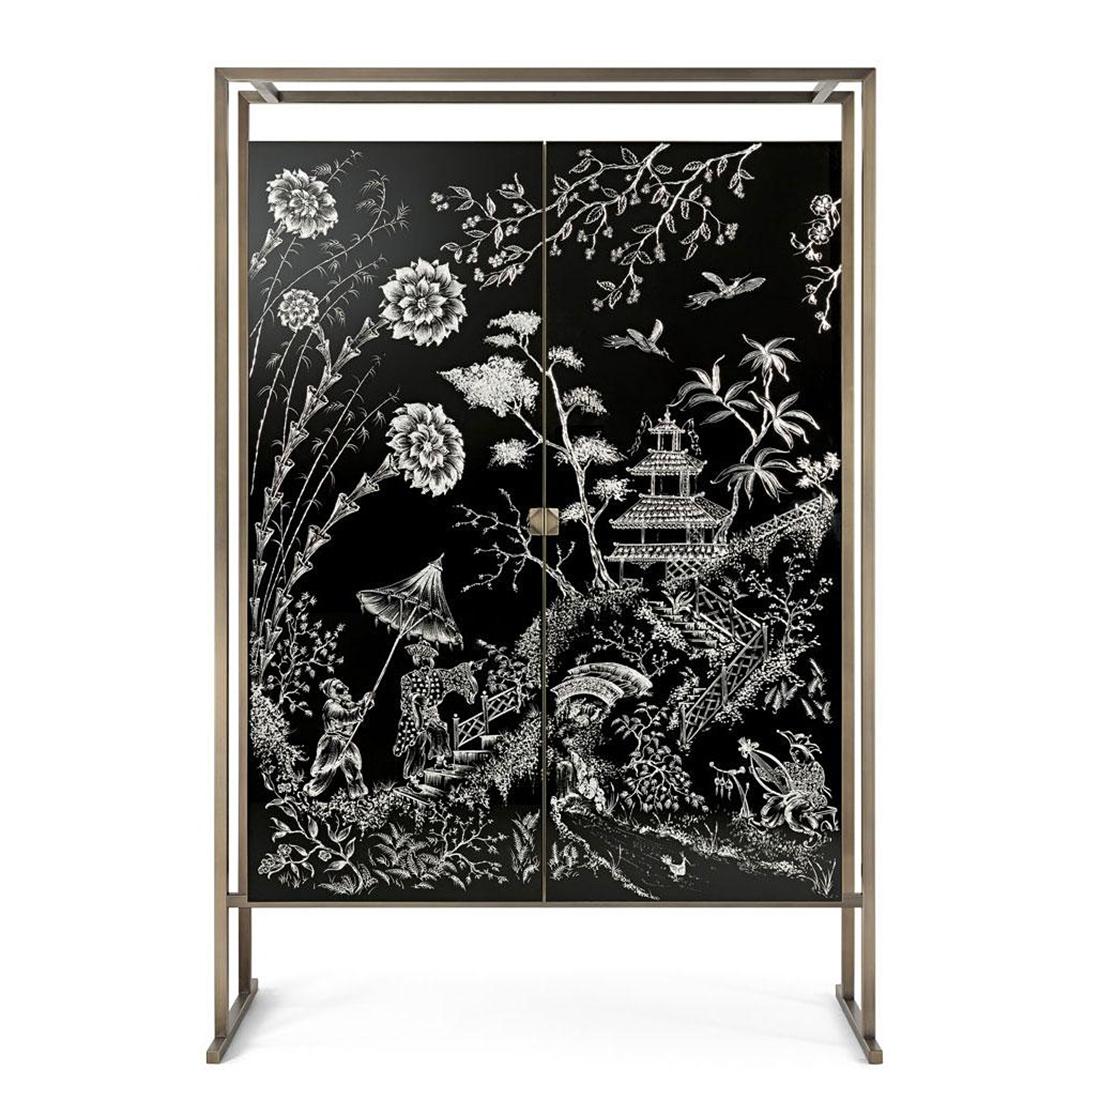 Cabinet bar Shangdu with burnished solid brass frame
and feet. With 2 doors, 3 shelves and 2 drawers inside. Doors
in black glass engraved with silvered finishes. Inside in matte
varnished grey wood, back wall mirrored and LED backlight.
Exceptional